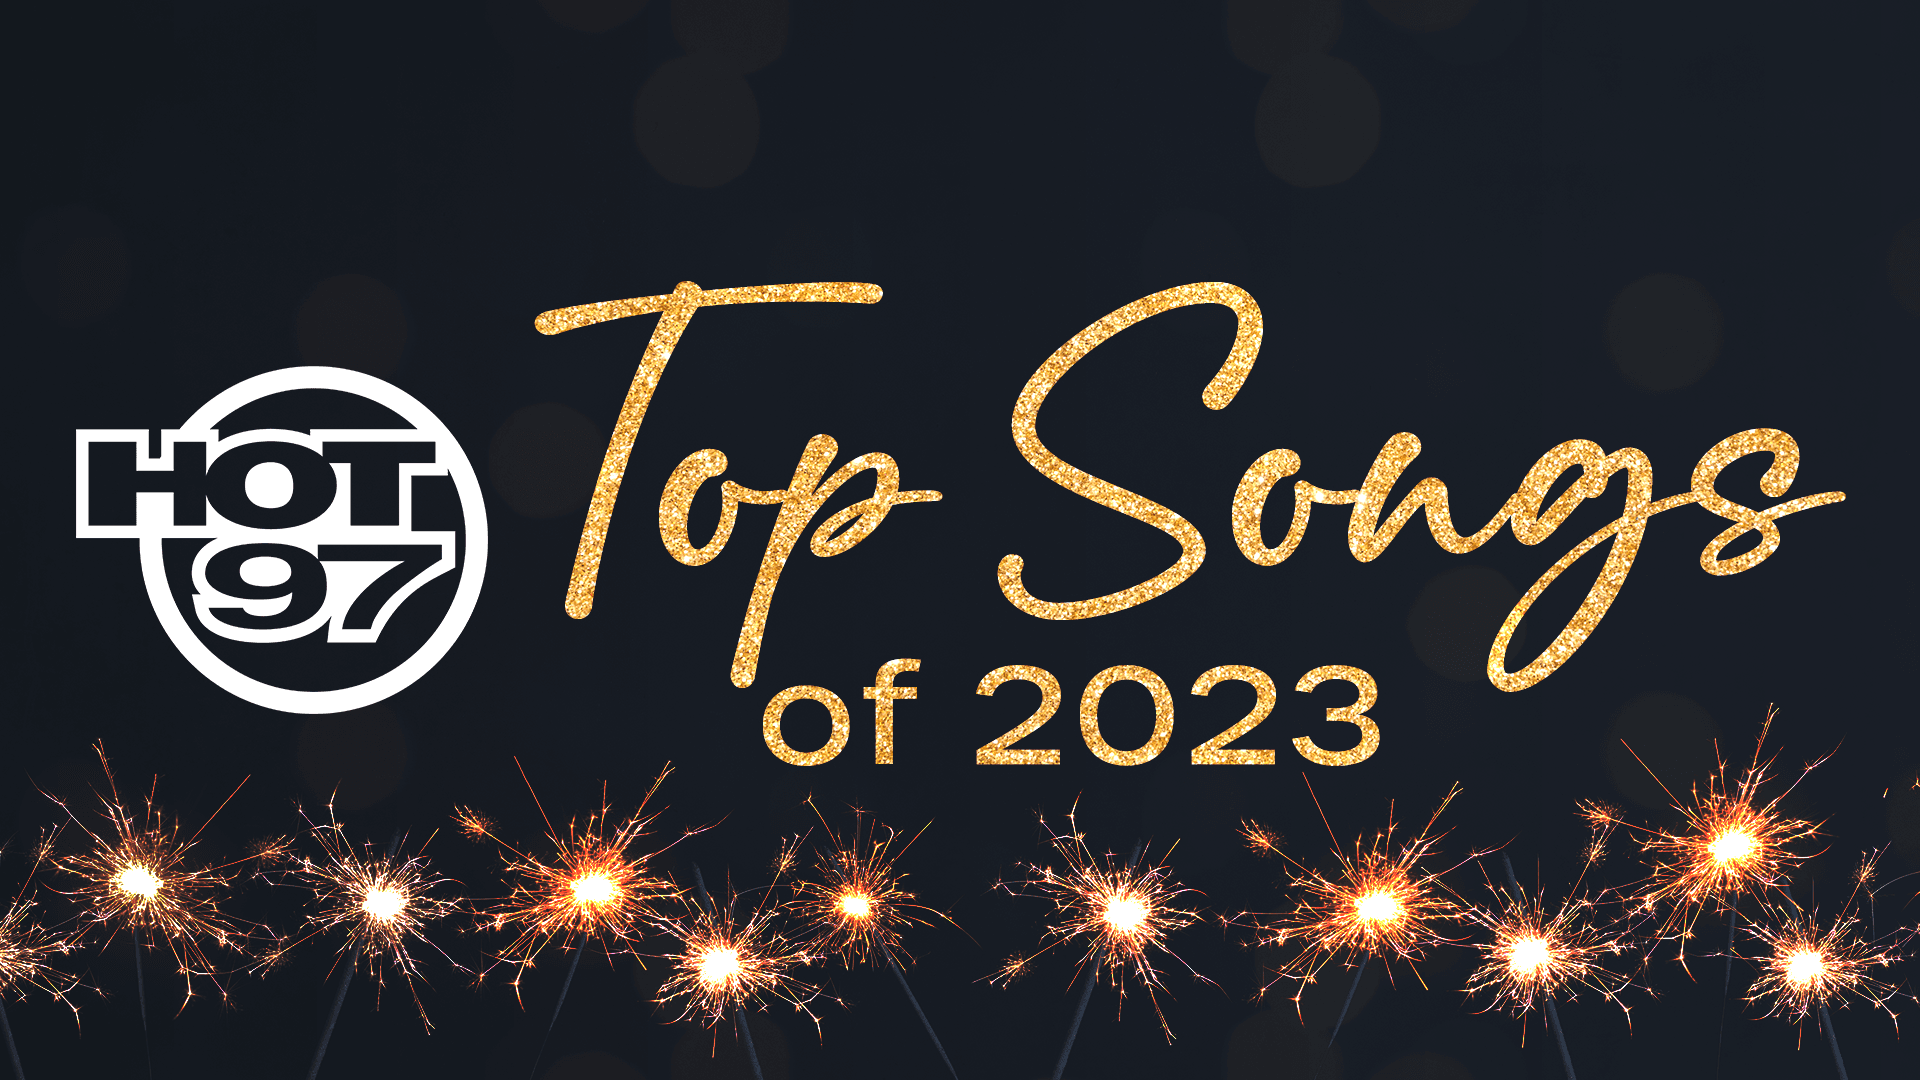 HOT 97's Editorial Team Selects the Top 23 Songs of 2023! 